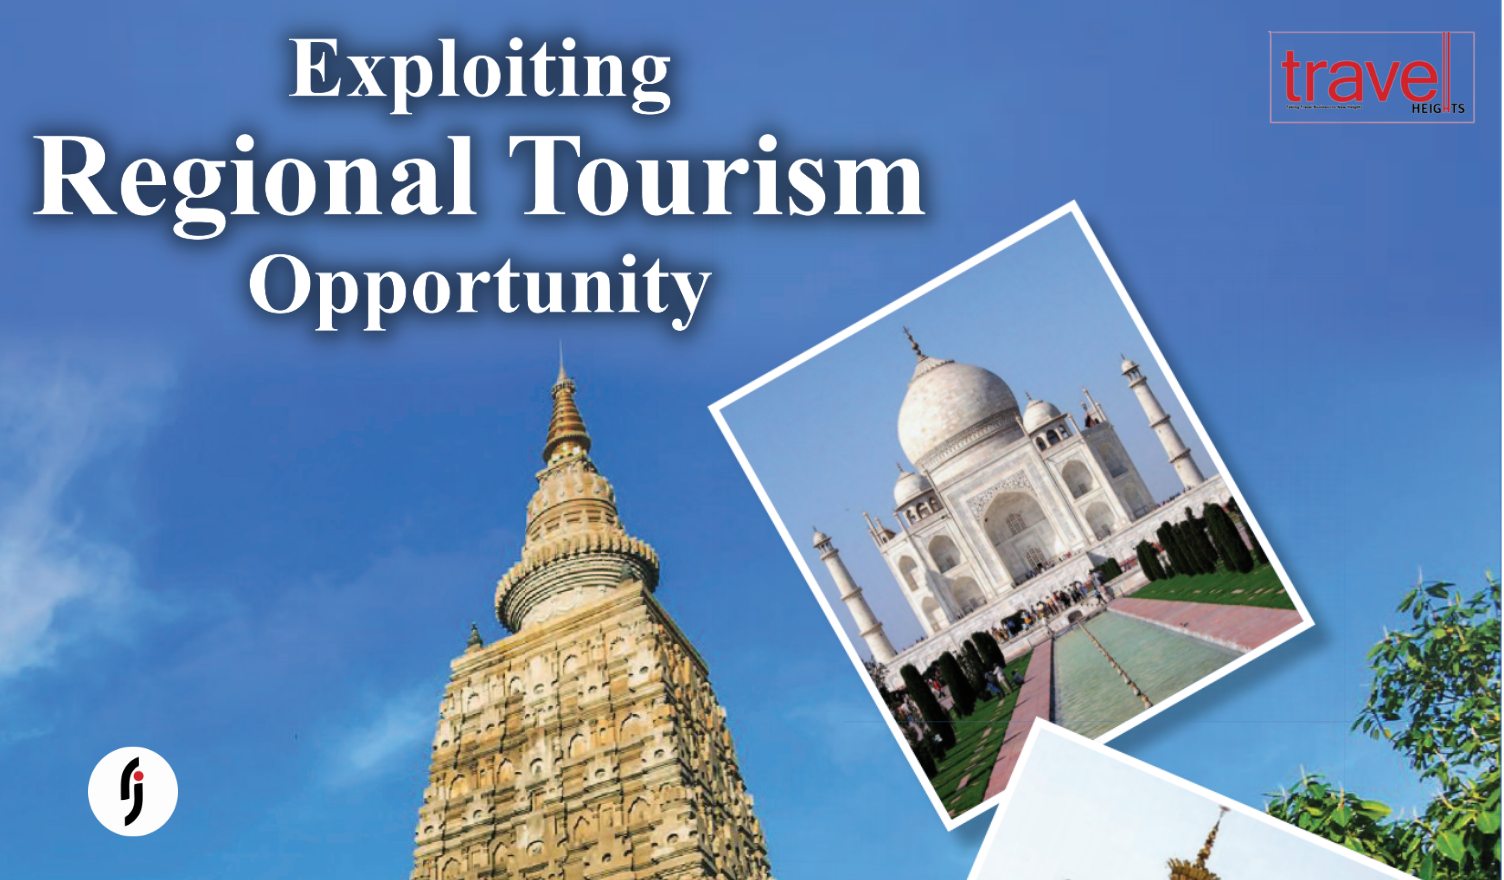 With a pre-Covid 23 per cent market share, Bangladesh is already India's biggest tourism source market. There is potential to grow the tourist numbers manifold and now is the time. Bangladesh present tremendous opportunity to boost India's tourism revenue.